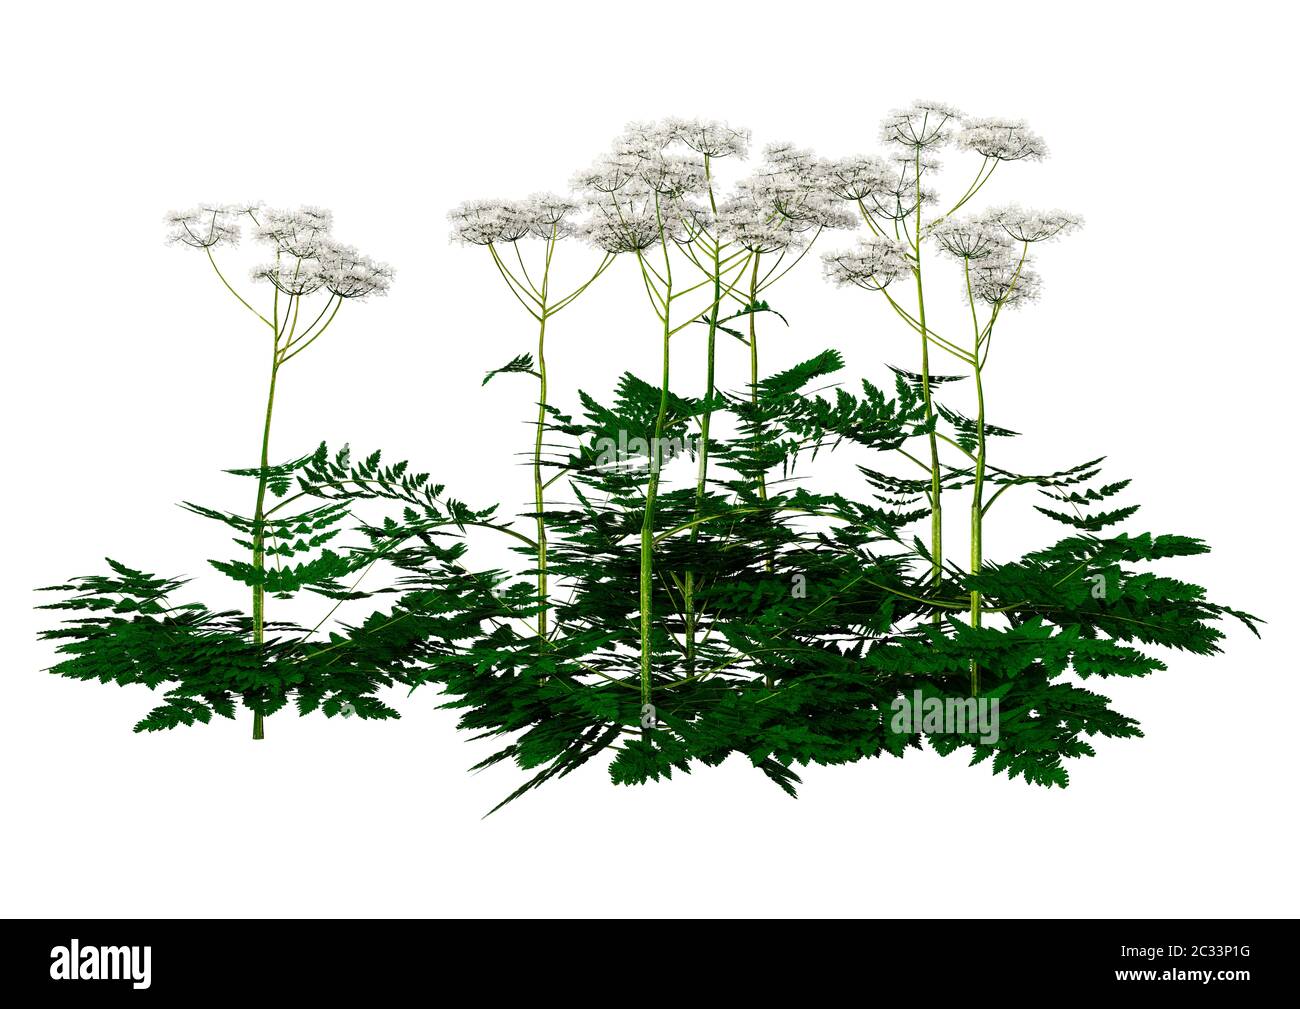 3D illustration of cow parsley plants isolated on white background Stock Photo